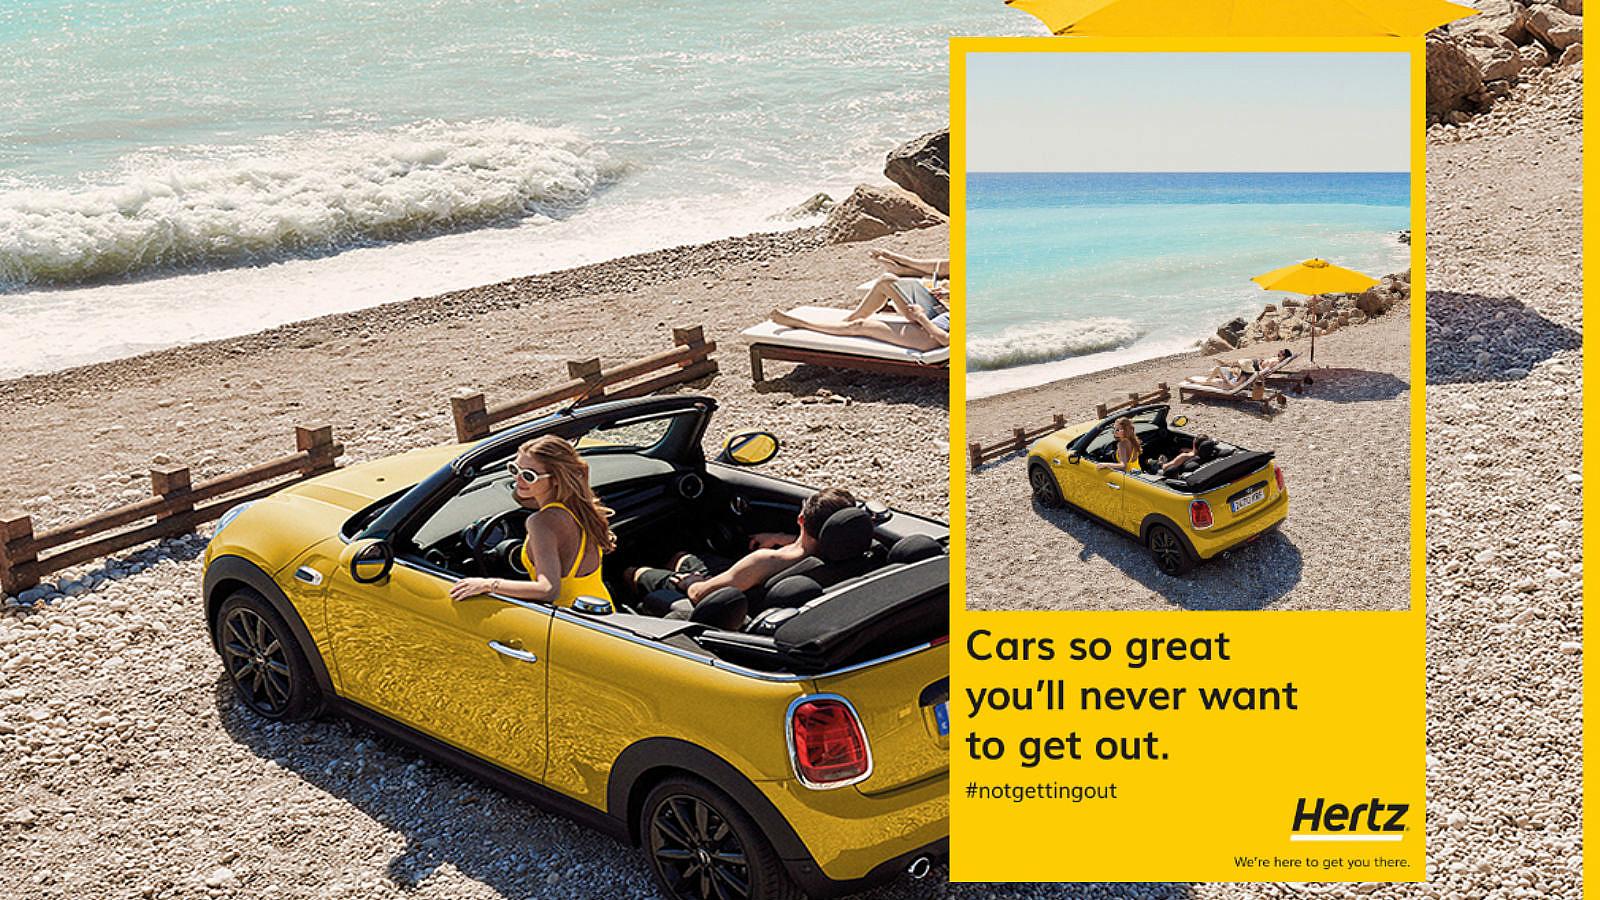 Hertz launches ‘Cars so great’ multi-platform campaign